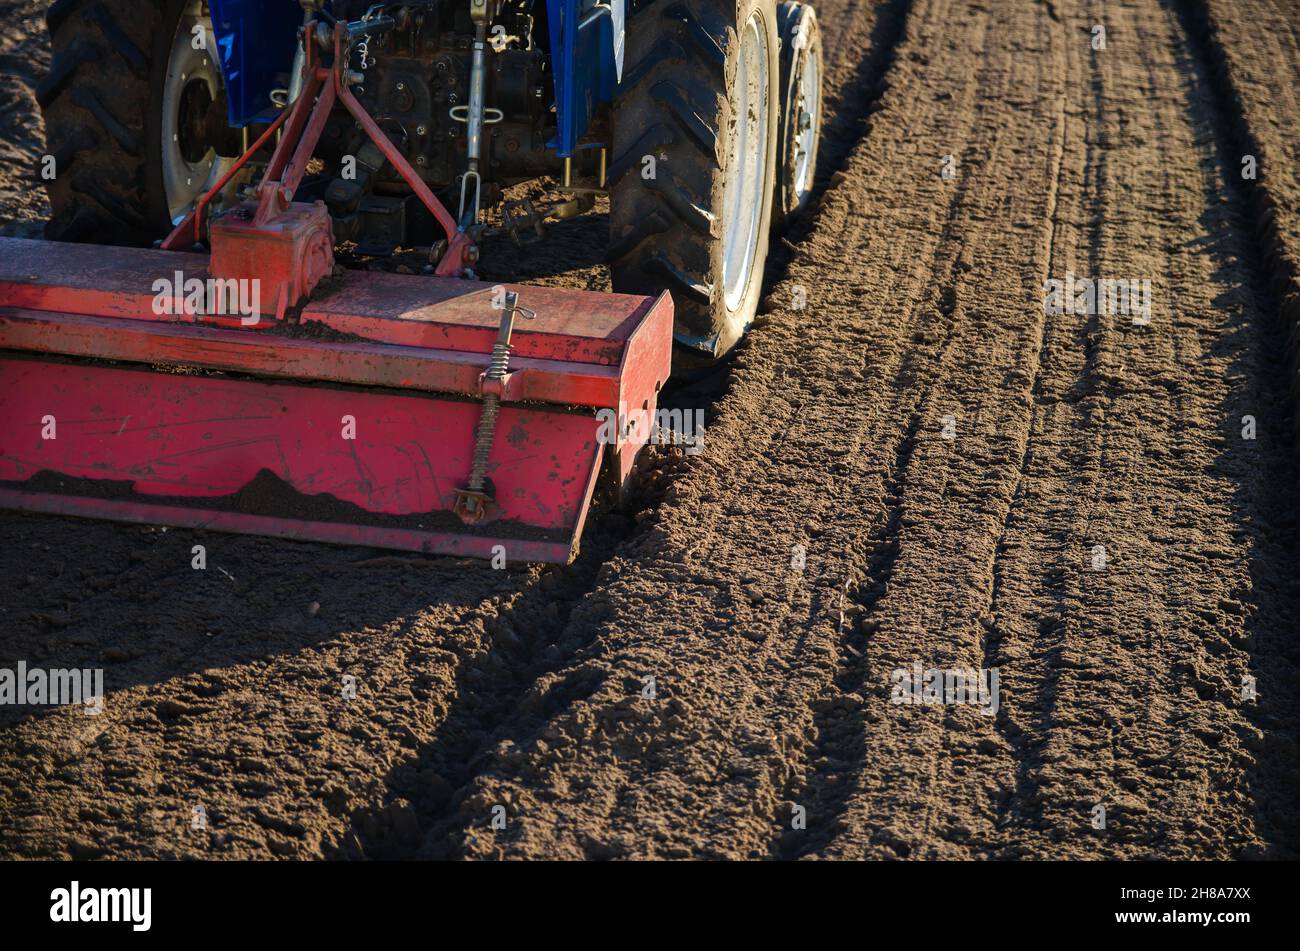 The tractor cultivator breaks up and mixes the soil, giving it softness and moisture for further cutting into rows. Small farms. Work in the agricultu Stock Photo